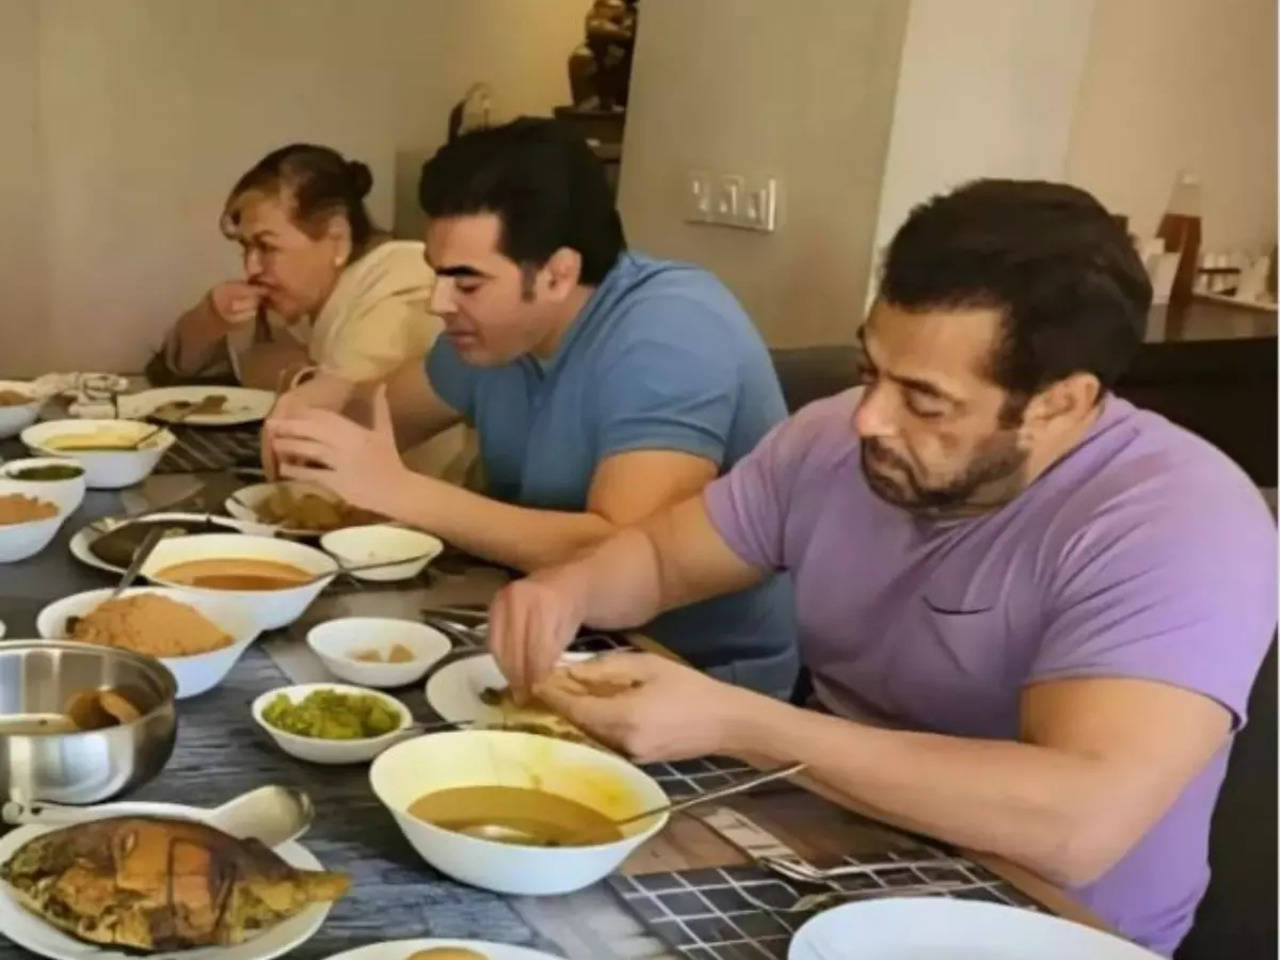 Salman Khan Xxx Sex Videos - Salman Khan's picture having a meal with Arbaaz Khan, Helen and family goes  viral, fans can't stop gushing over it! | Hindi Movie News - Times of India